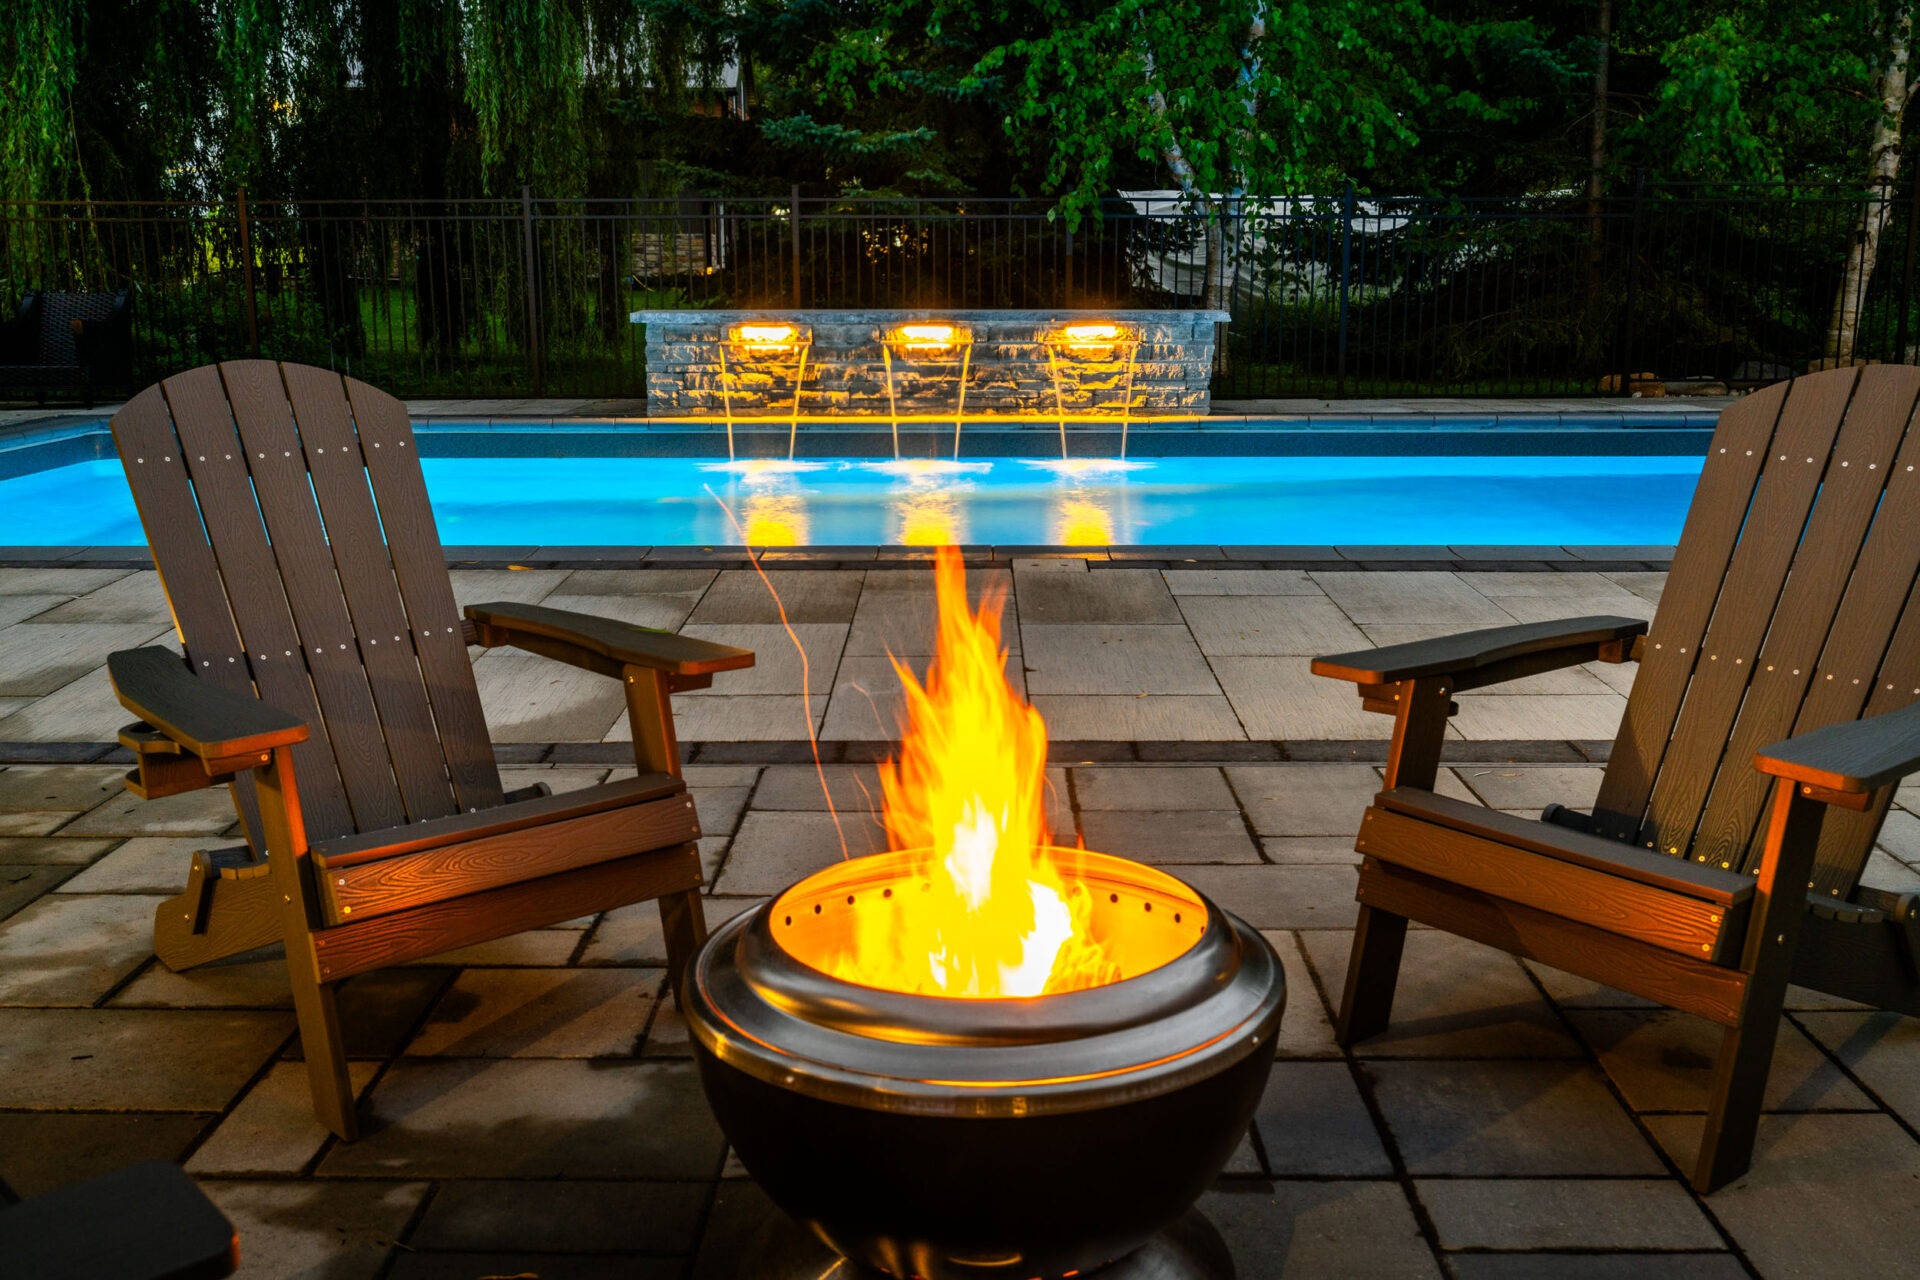 Two wooden Adirondack chairs flank a blazing fire pit on a patio, with a lit pool and stone fire feature in the background at dusk.